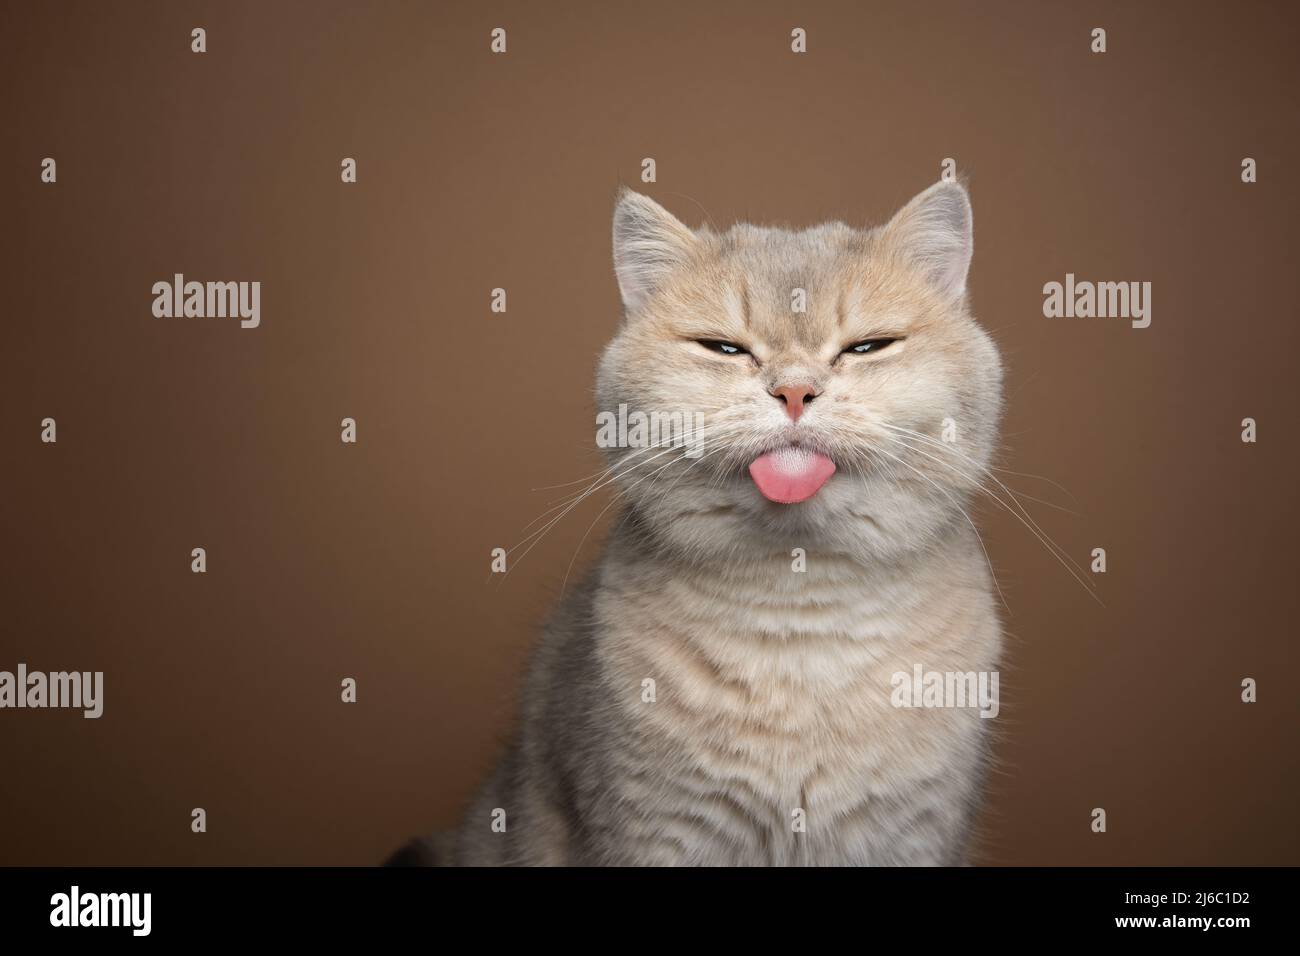 naughty british shorthair cat sticking out tongue on brown background with copy space Stock Photo